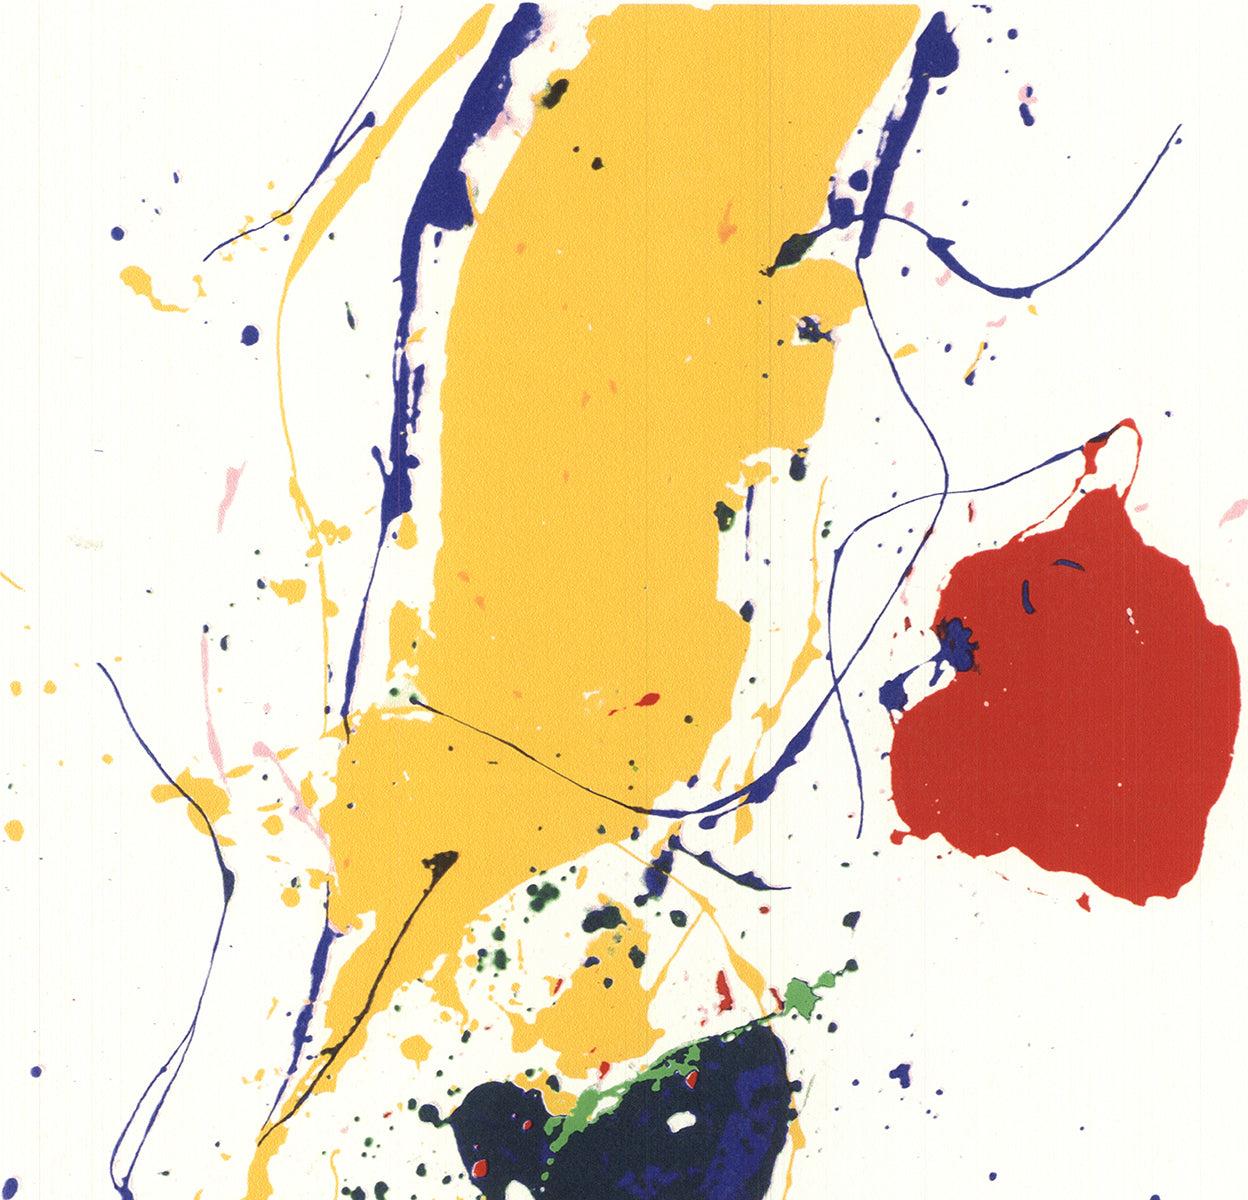 "Untitled Yellow Streak" by Sam Francis is a striking artwork that exemplifies the artist's signature style and mastery of color. Created in 1985, this piece showcases Francis's exploration of abstract expressionism, characterized by vibrant hues,